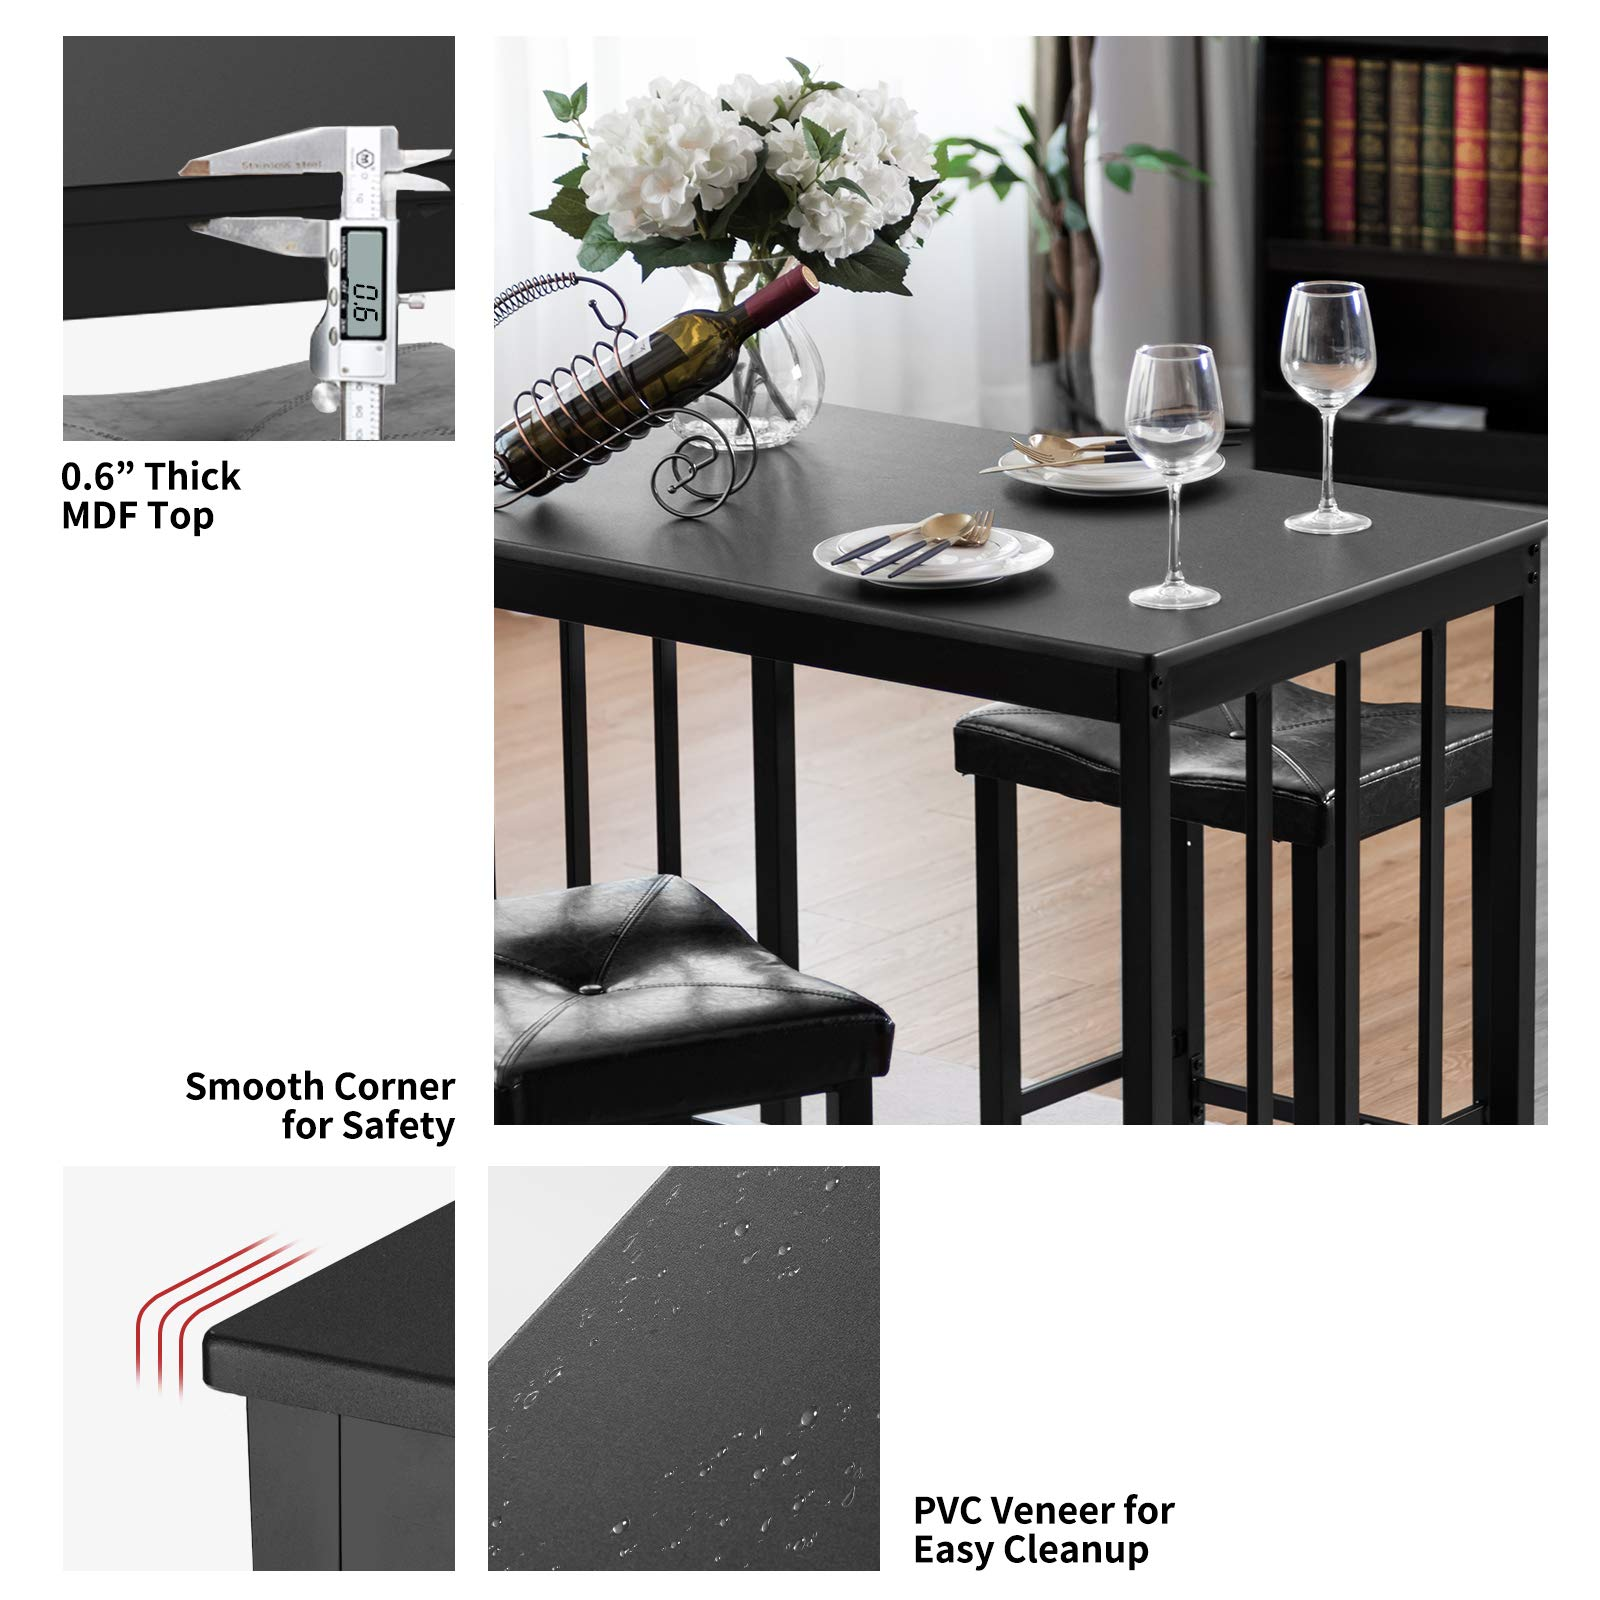 Giantex 3 piece Dining Set, Counter Height Table Set with Black Frosted Tabletop and Metal Frame for Kitchen